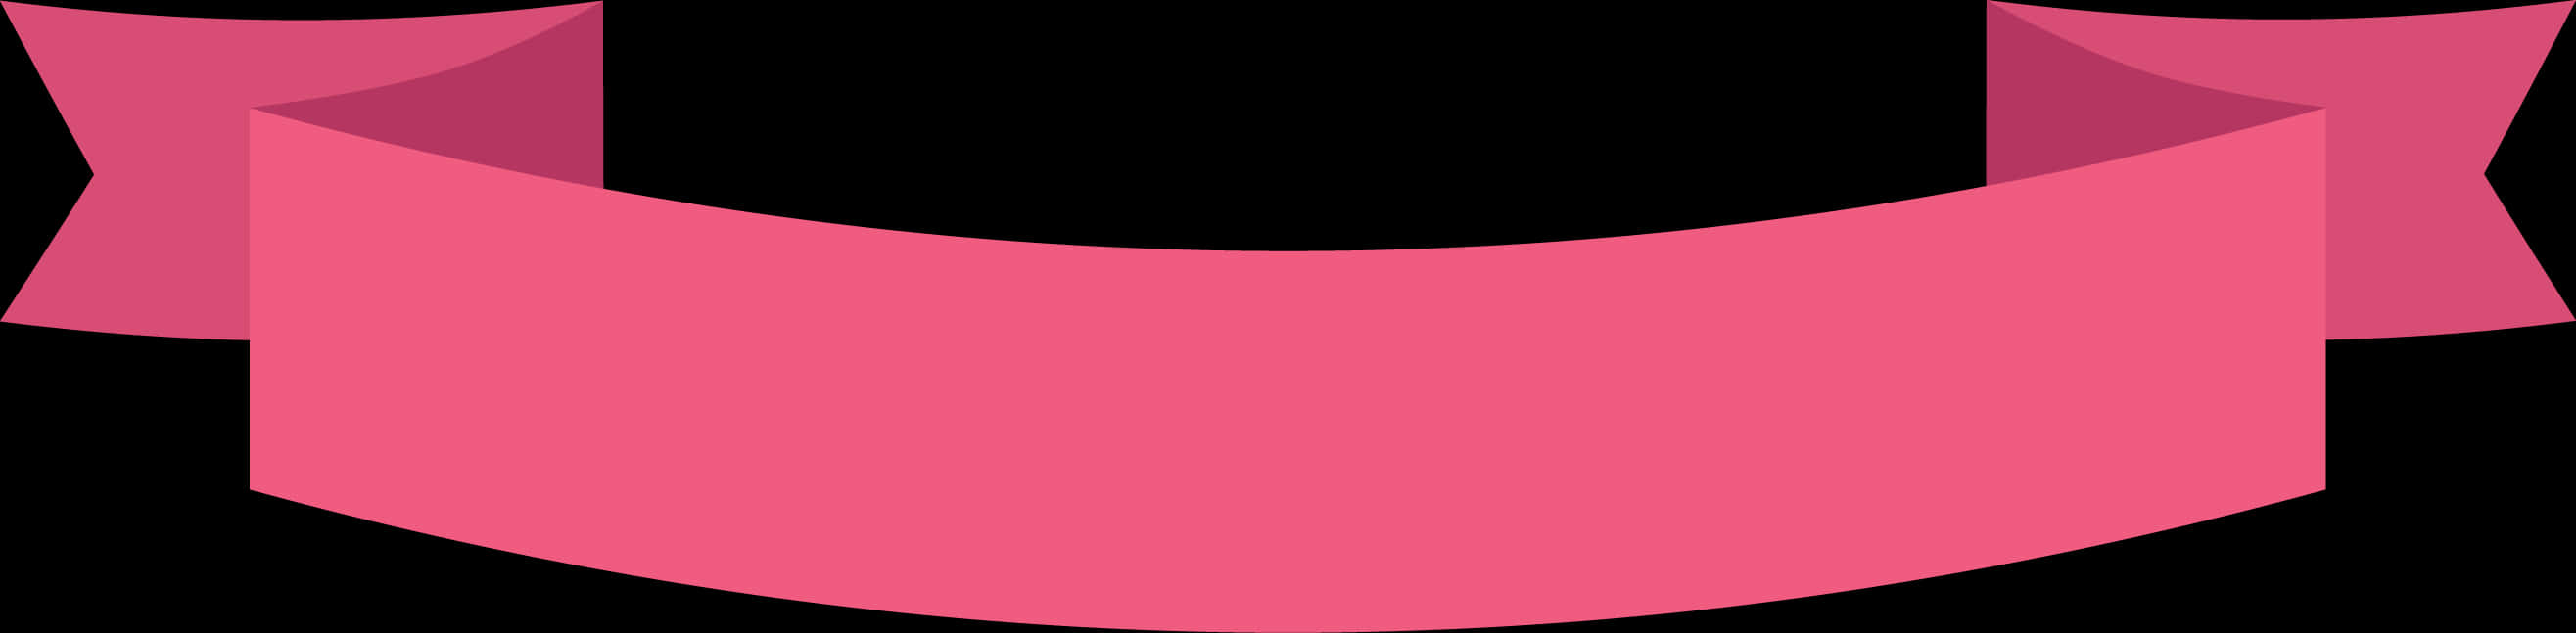 A Pink And Black Striped Object